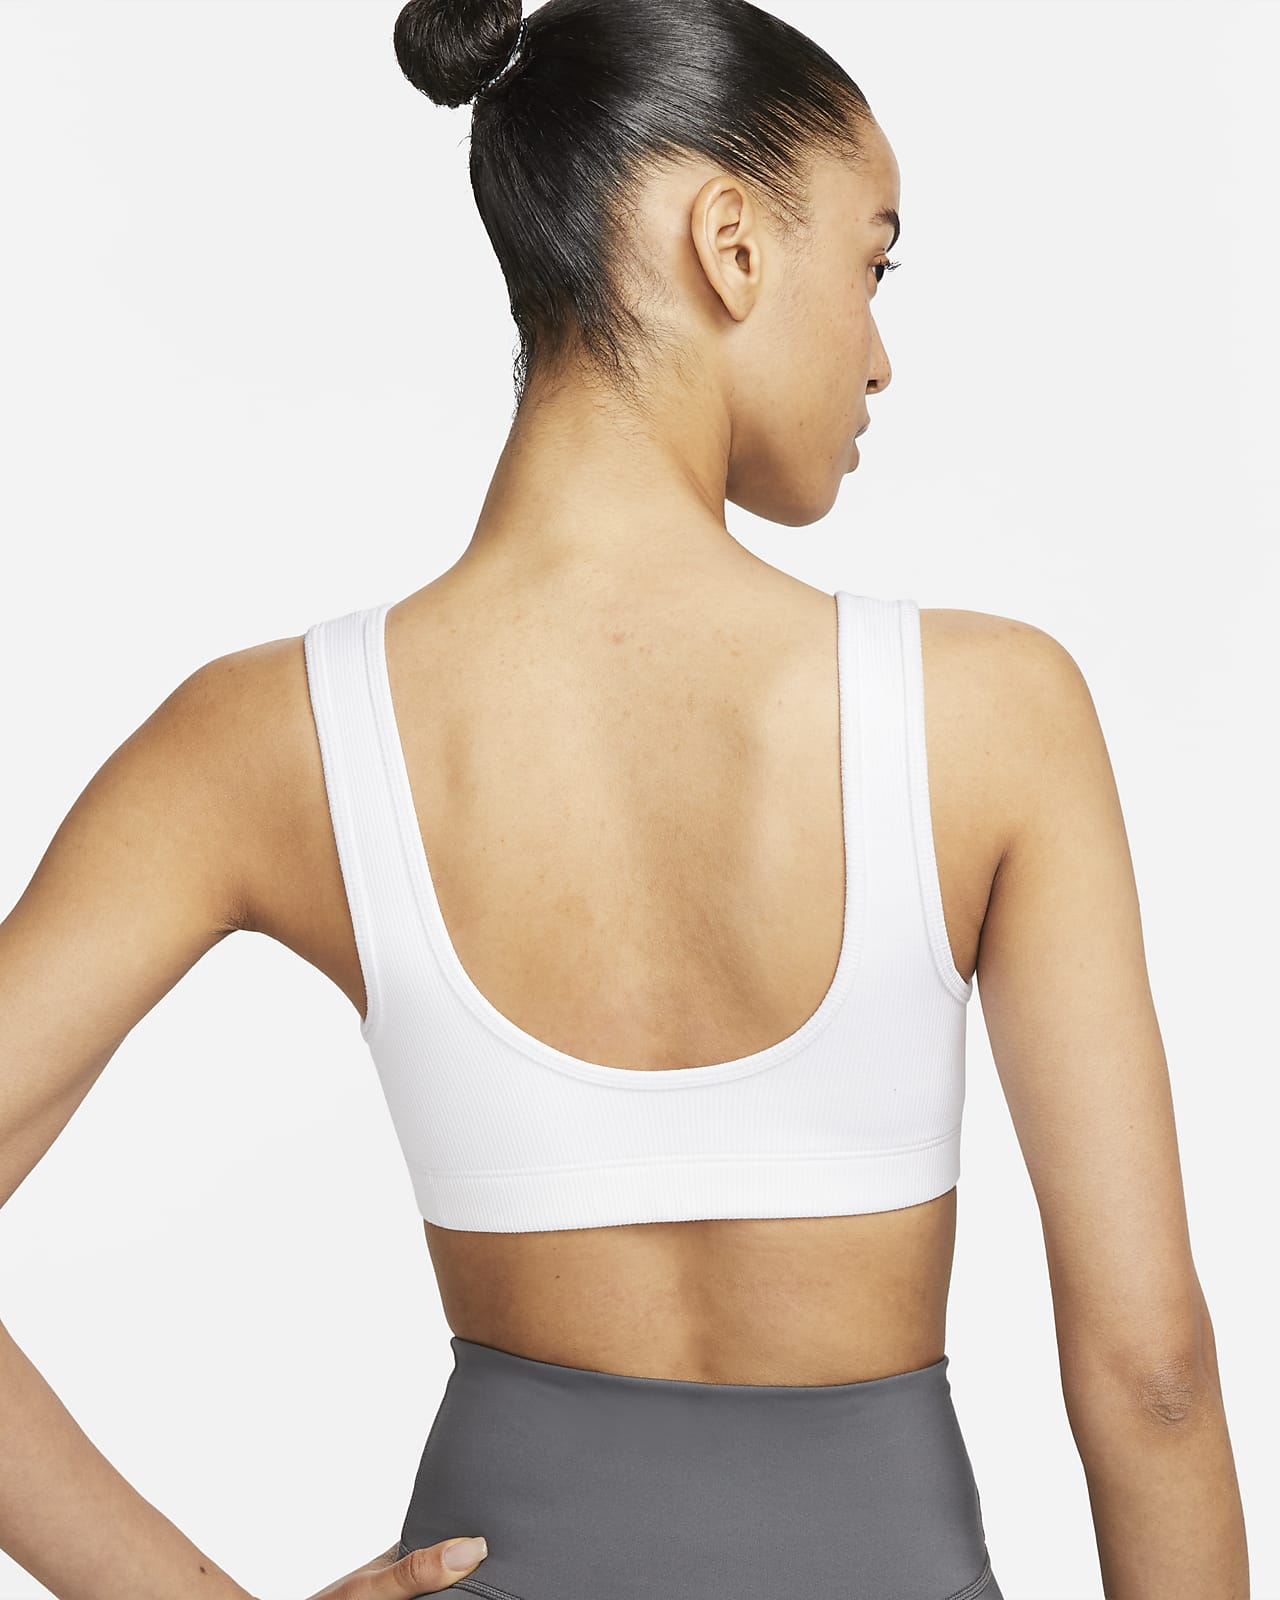 Nike Training Alpha Ultra-breathable Sports Bra Pink - $21 (64% Off Retail)  - From Ella